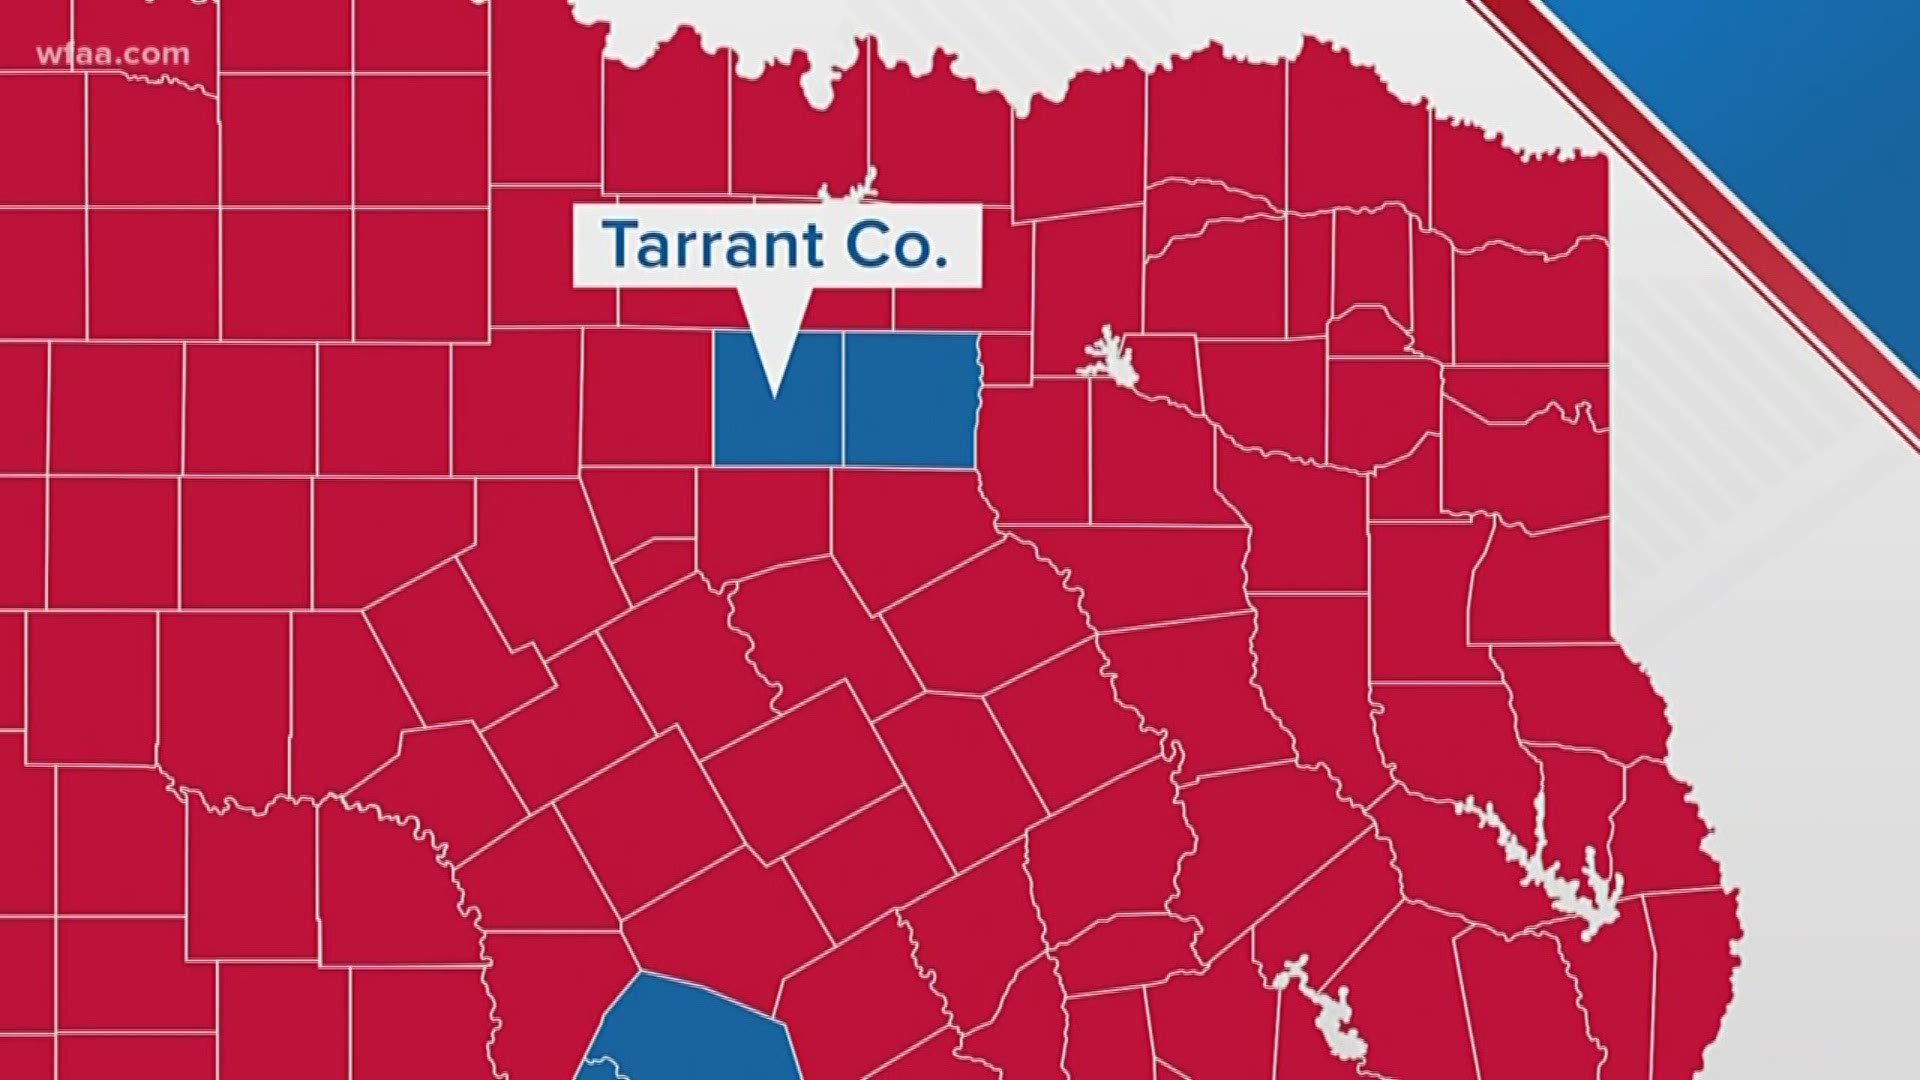 New North Texas political background: Tarrant County